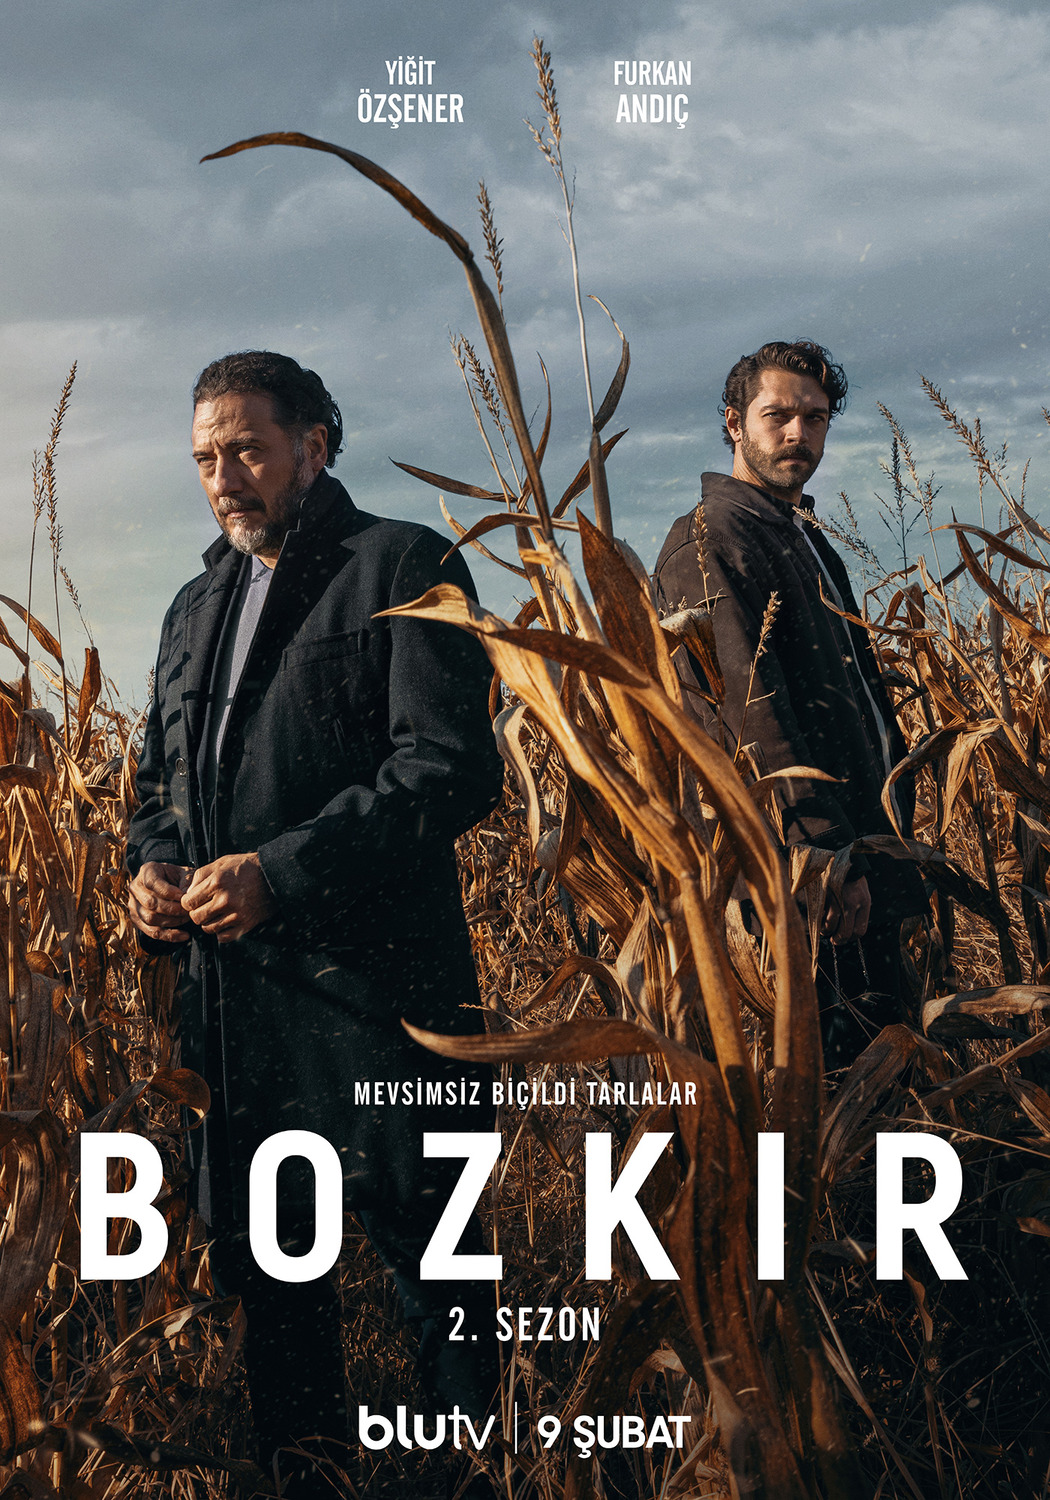 Extra Large TV Poster Image for Bozkir (#5 of 10)